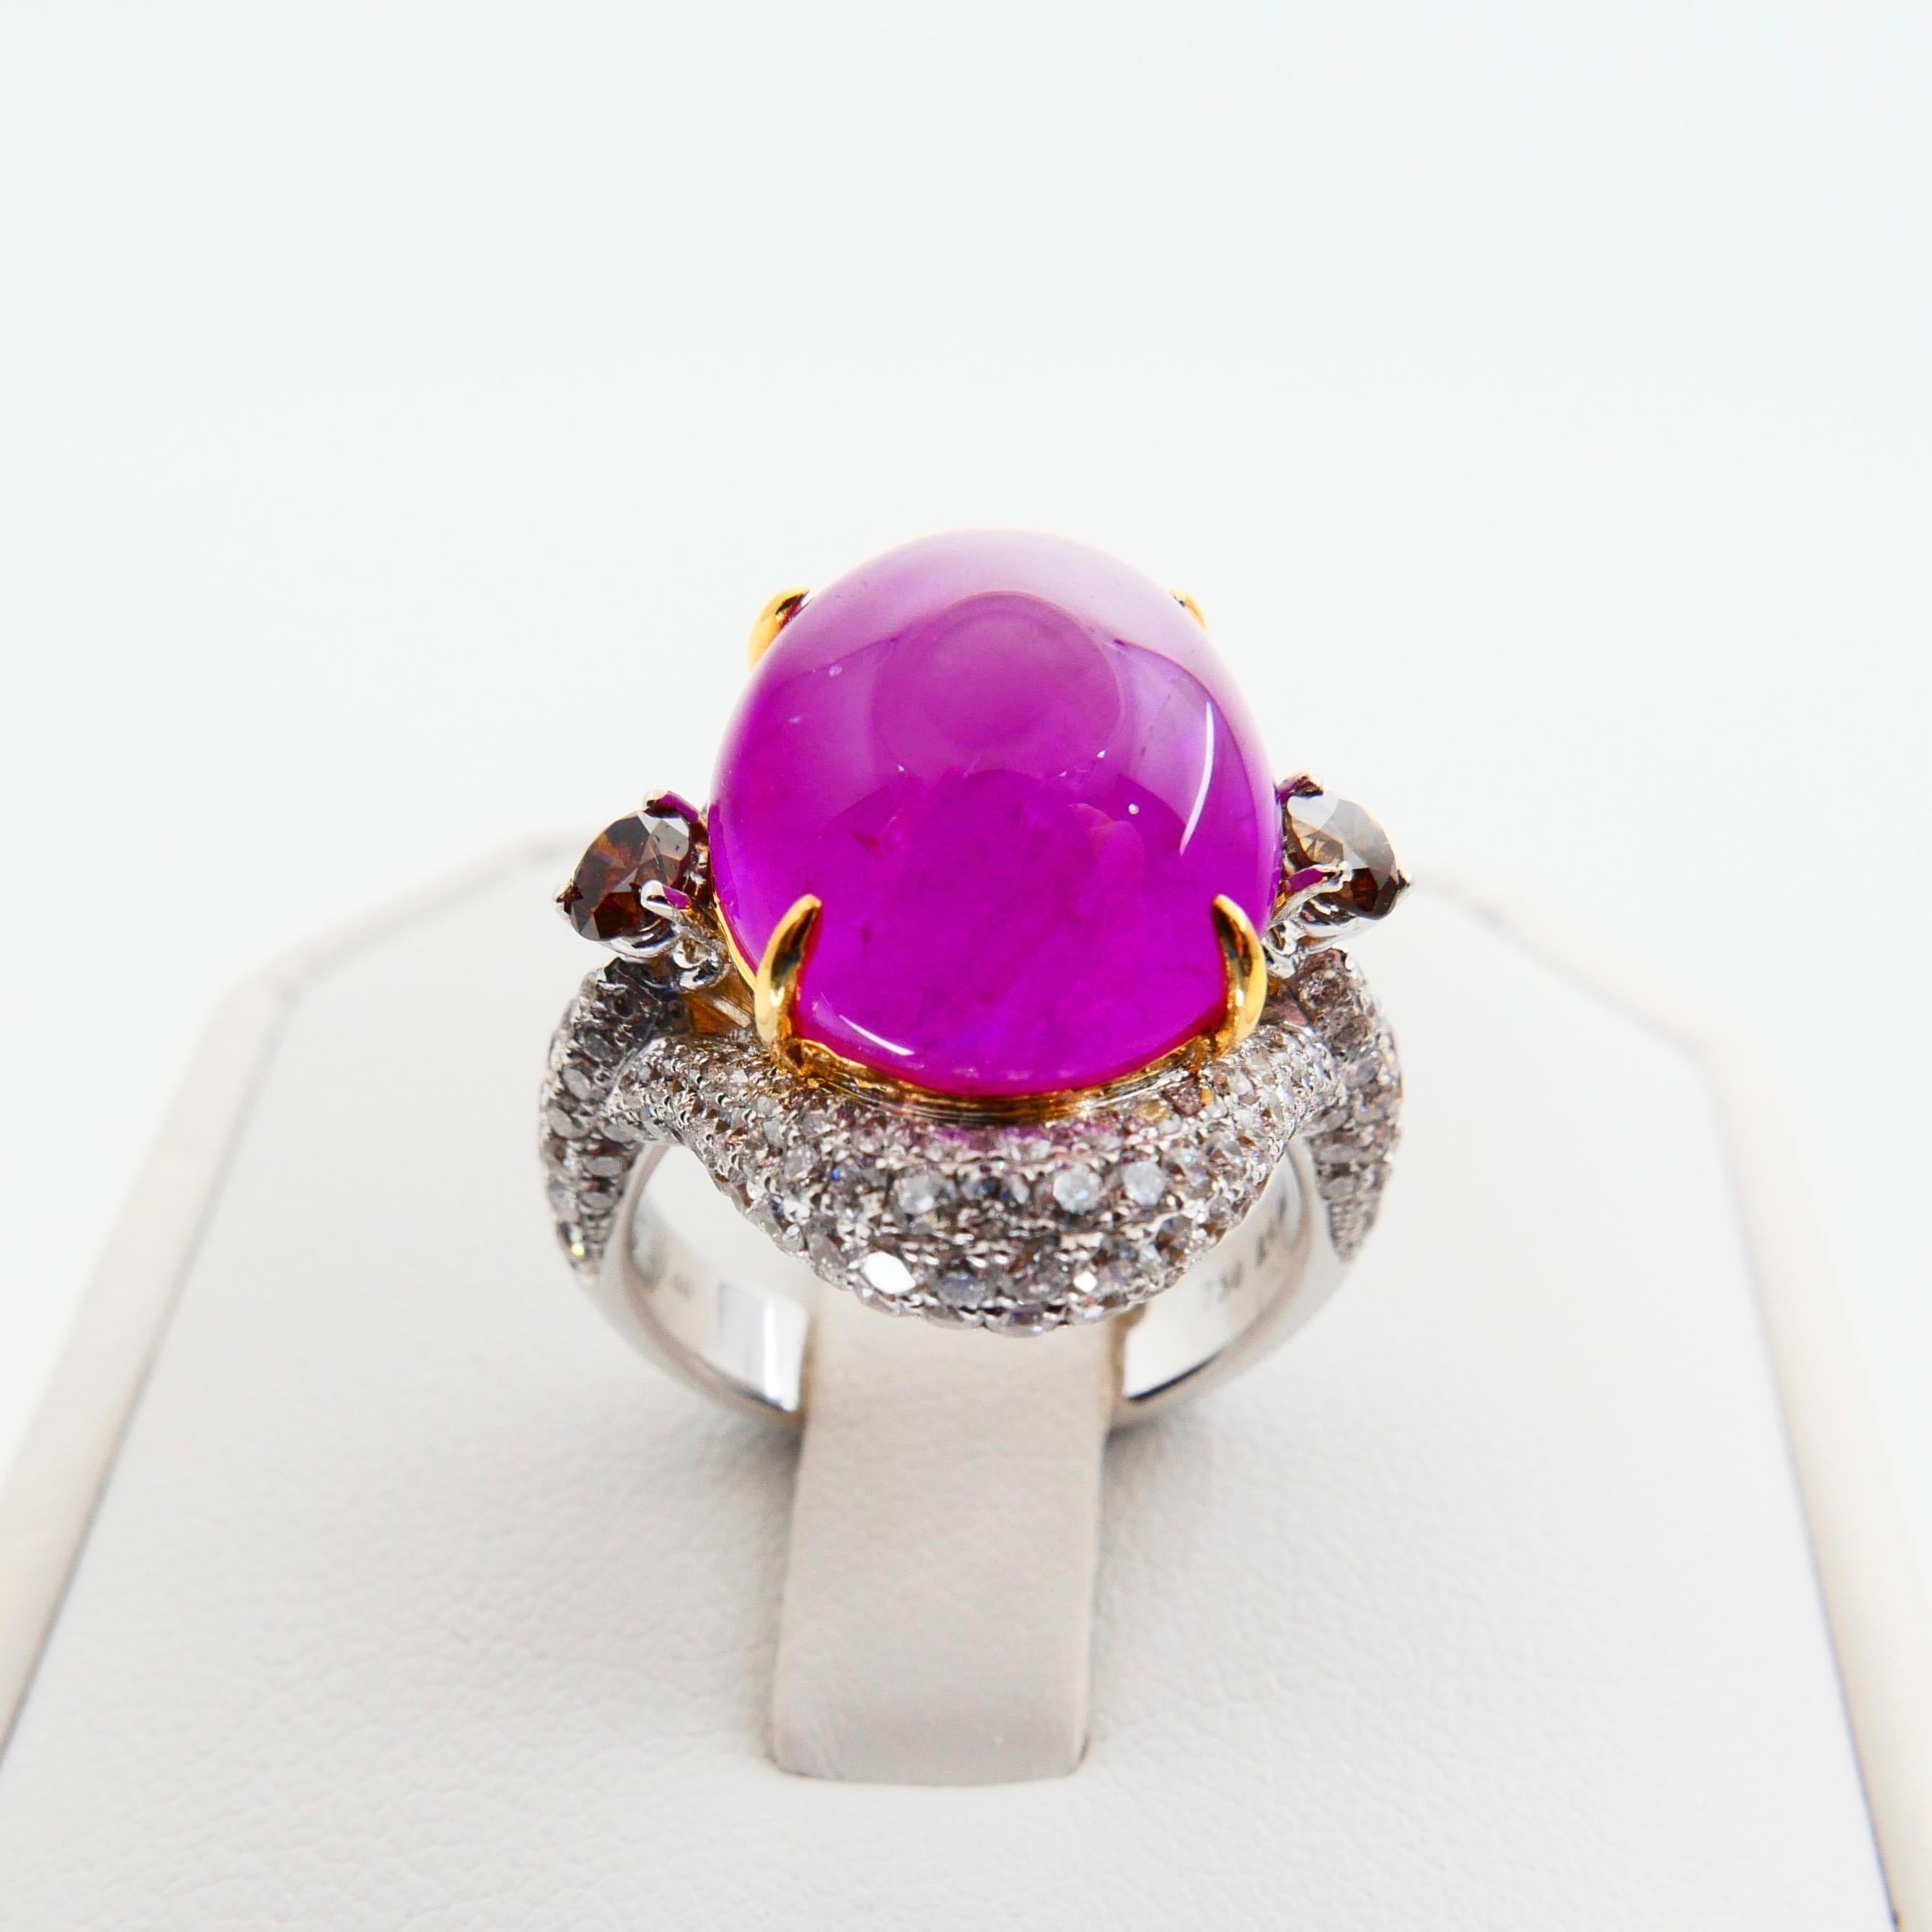 Certified 9 Carat No Heat Pinkish Red Ruby & Fancy Cognac Diamond Cocktail Ring For Sale 9